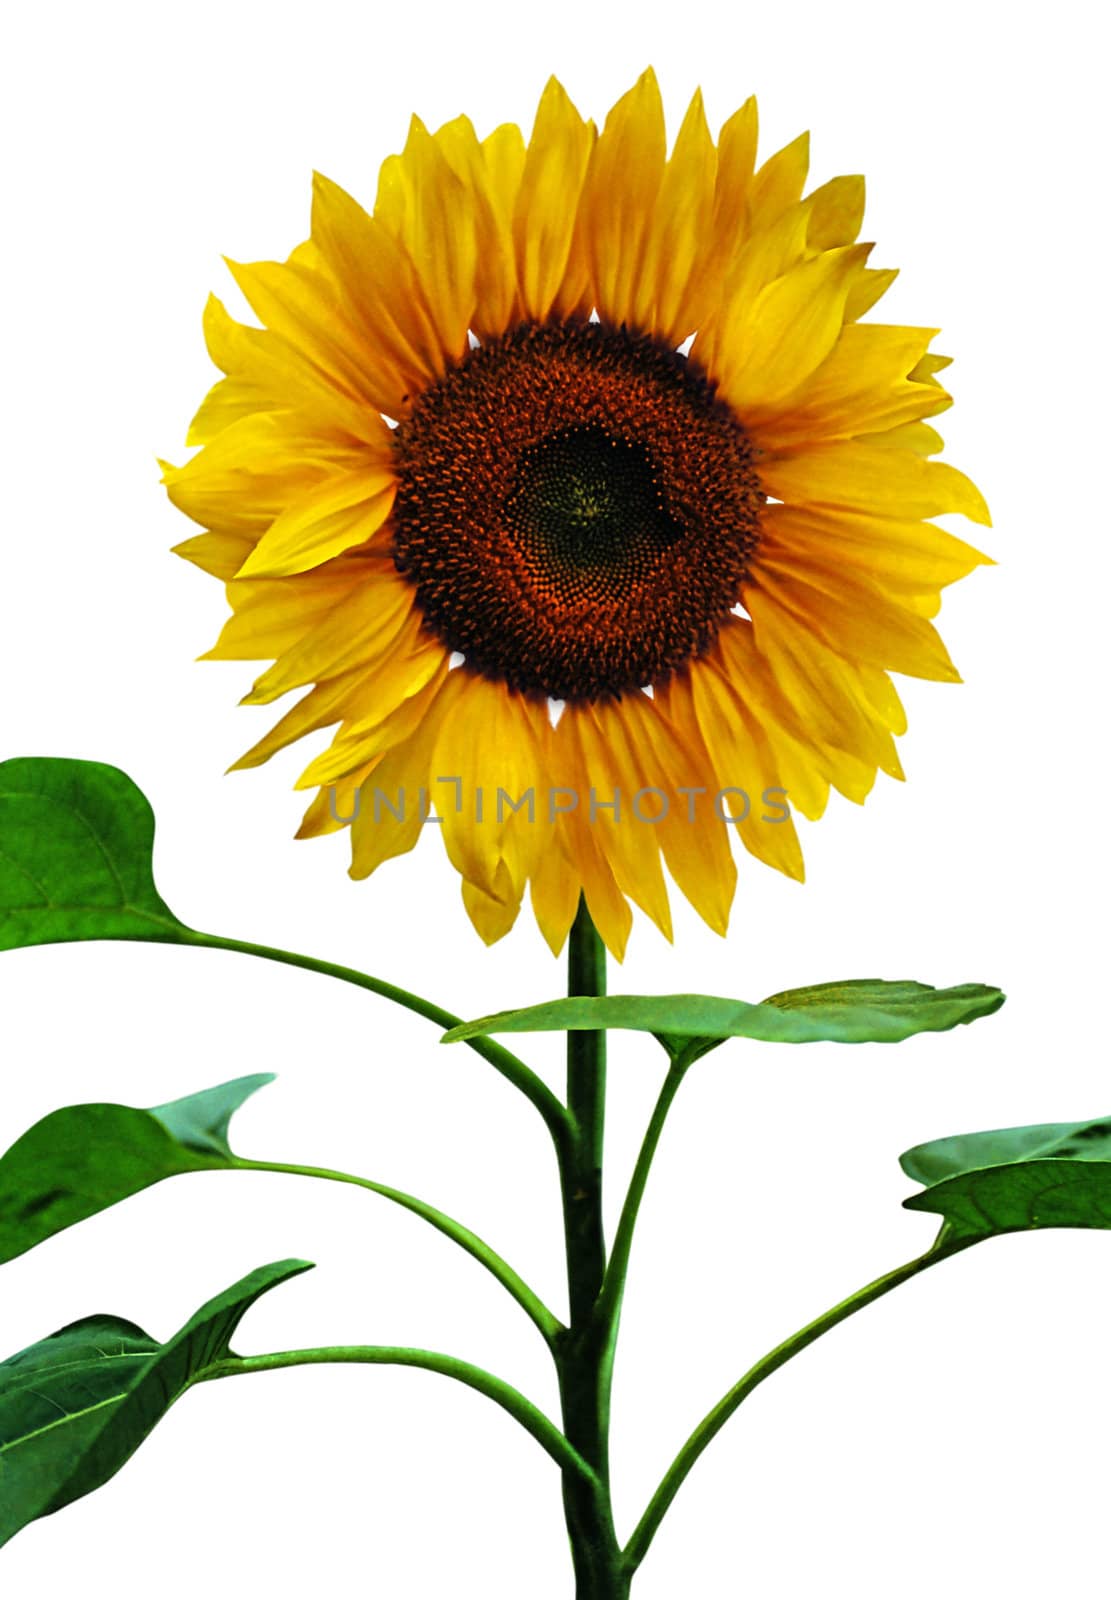 Sunflowers, isolated on white background by zeffss